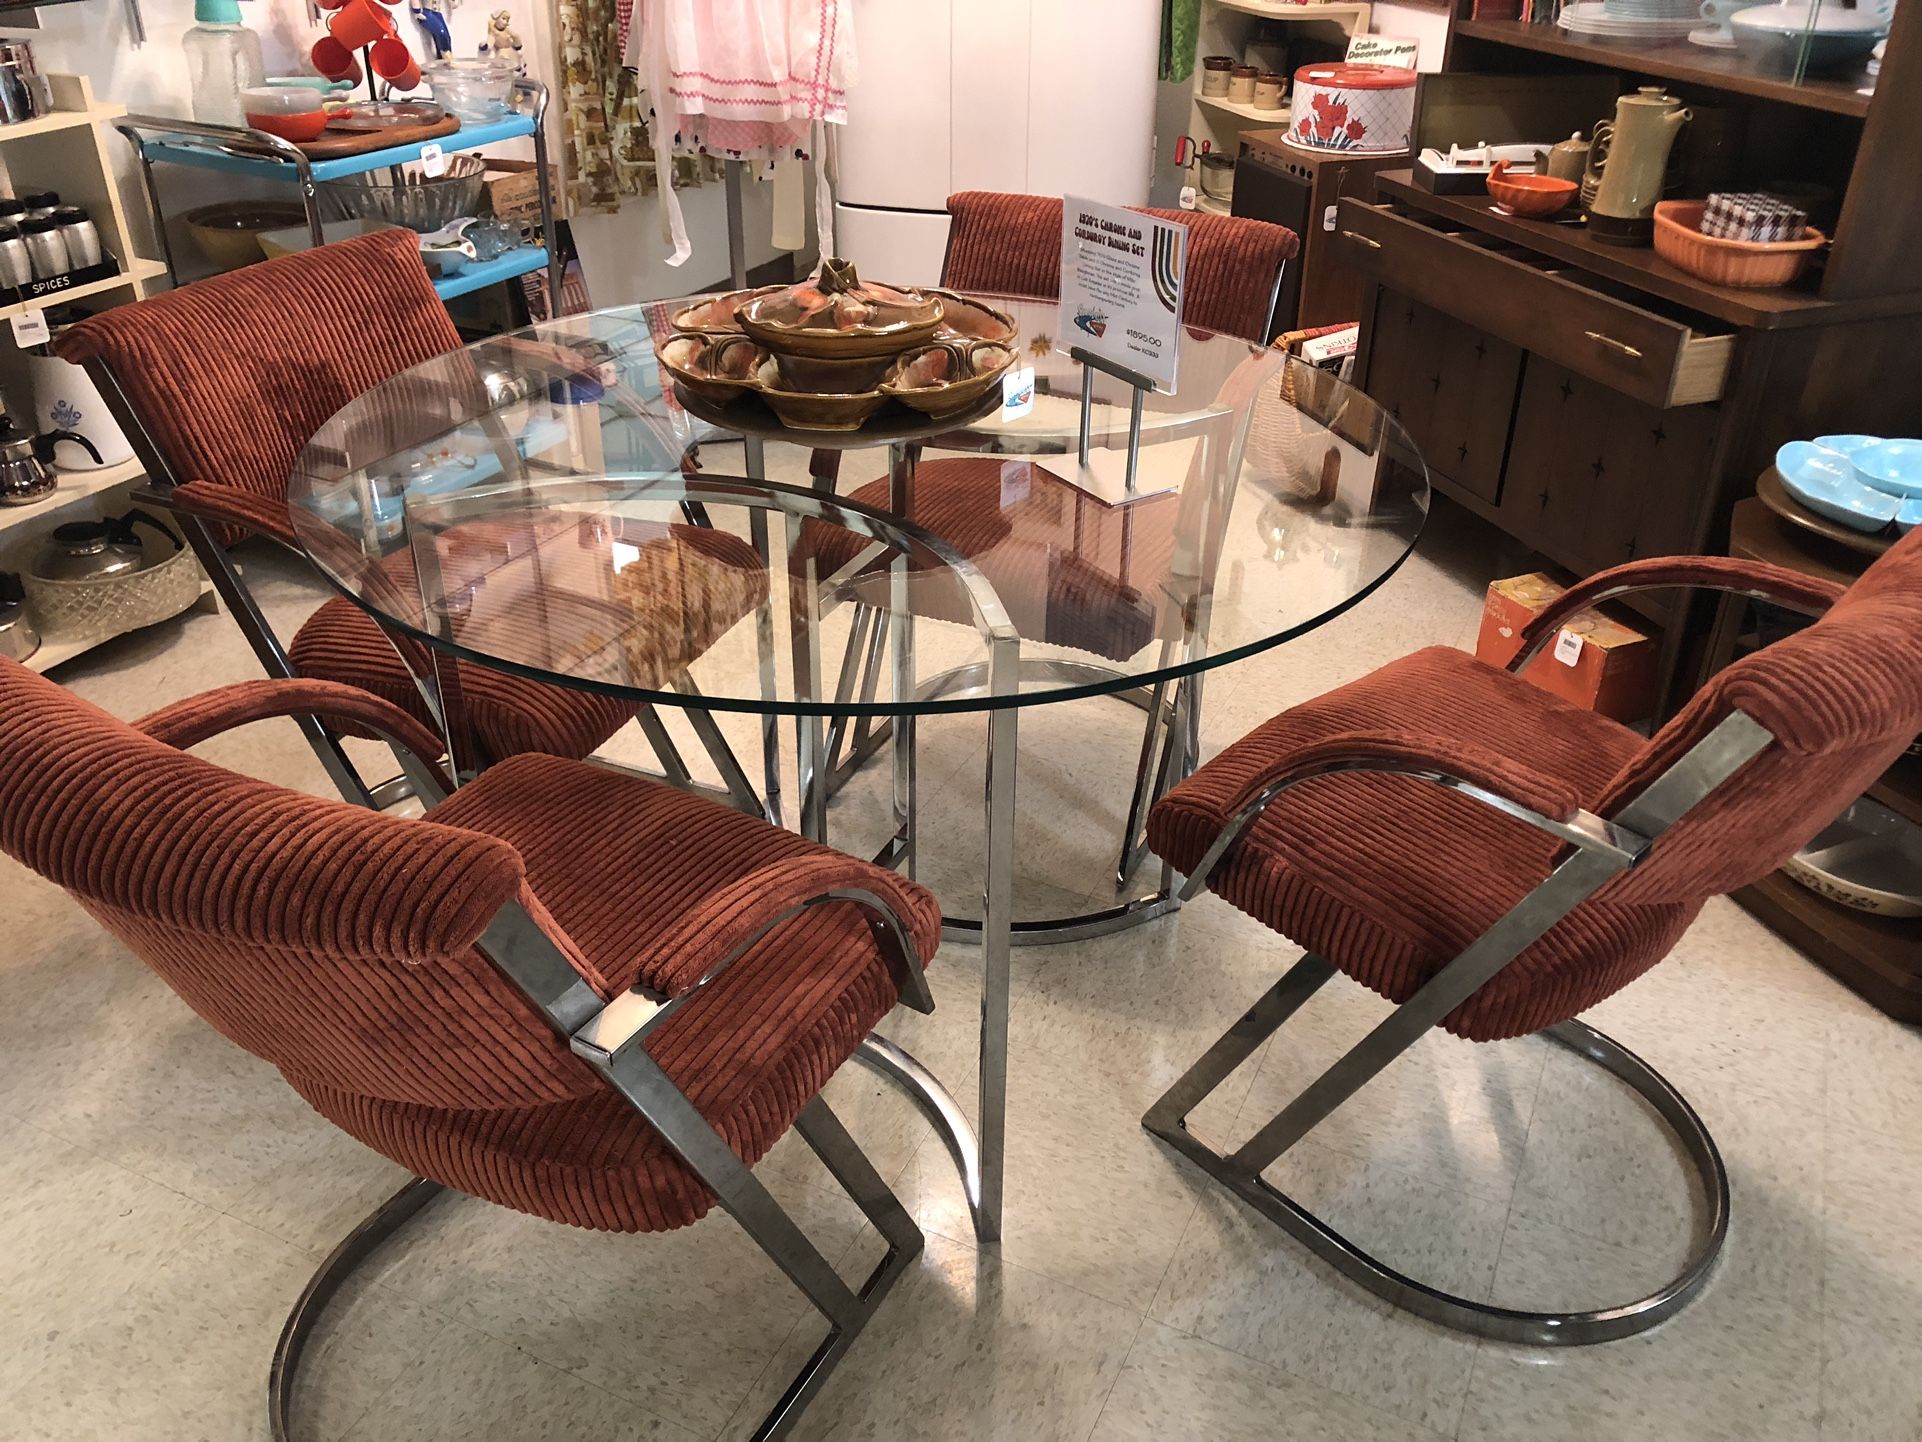 VINTAGE 70’S CHROME & GLASS TABLE & 6 CHAIRS